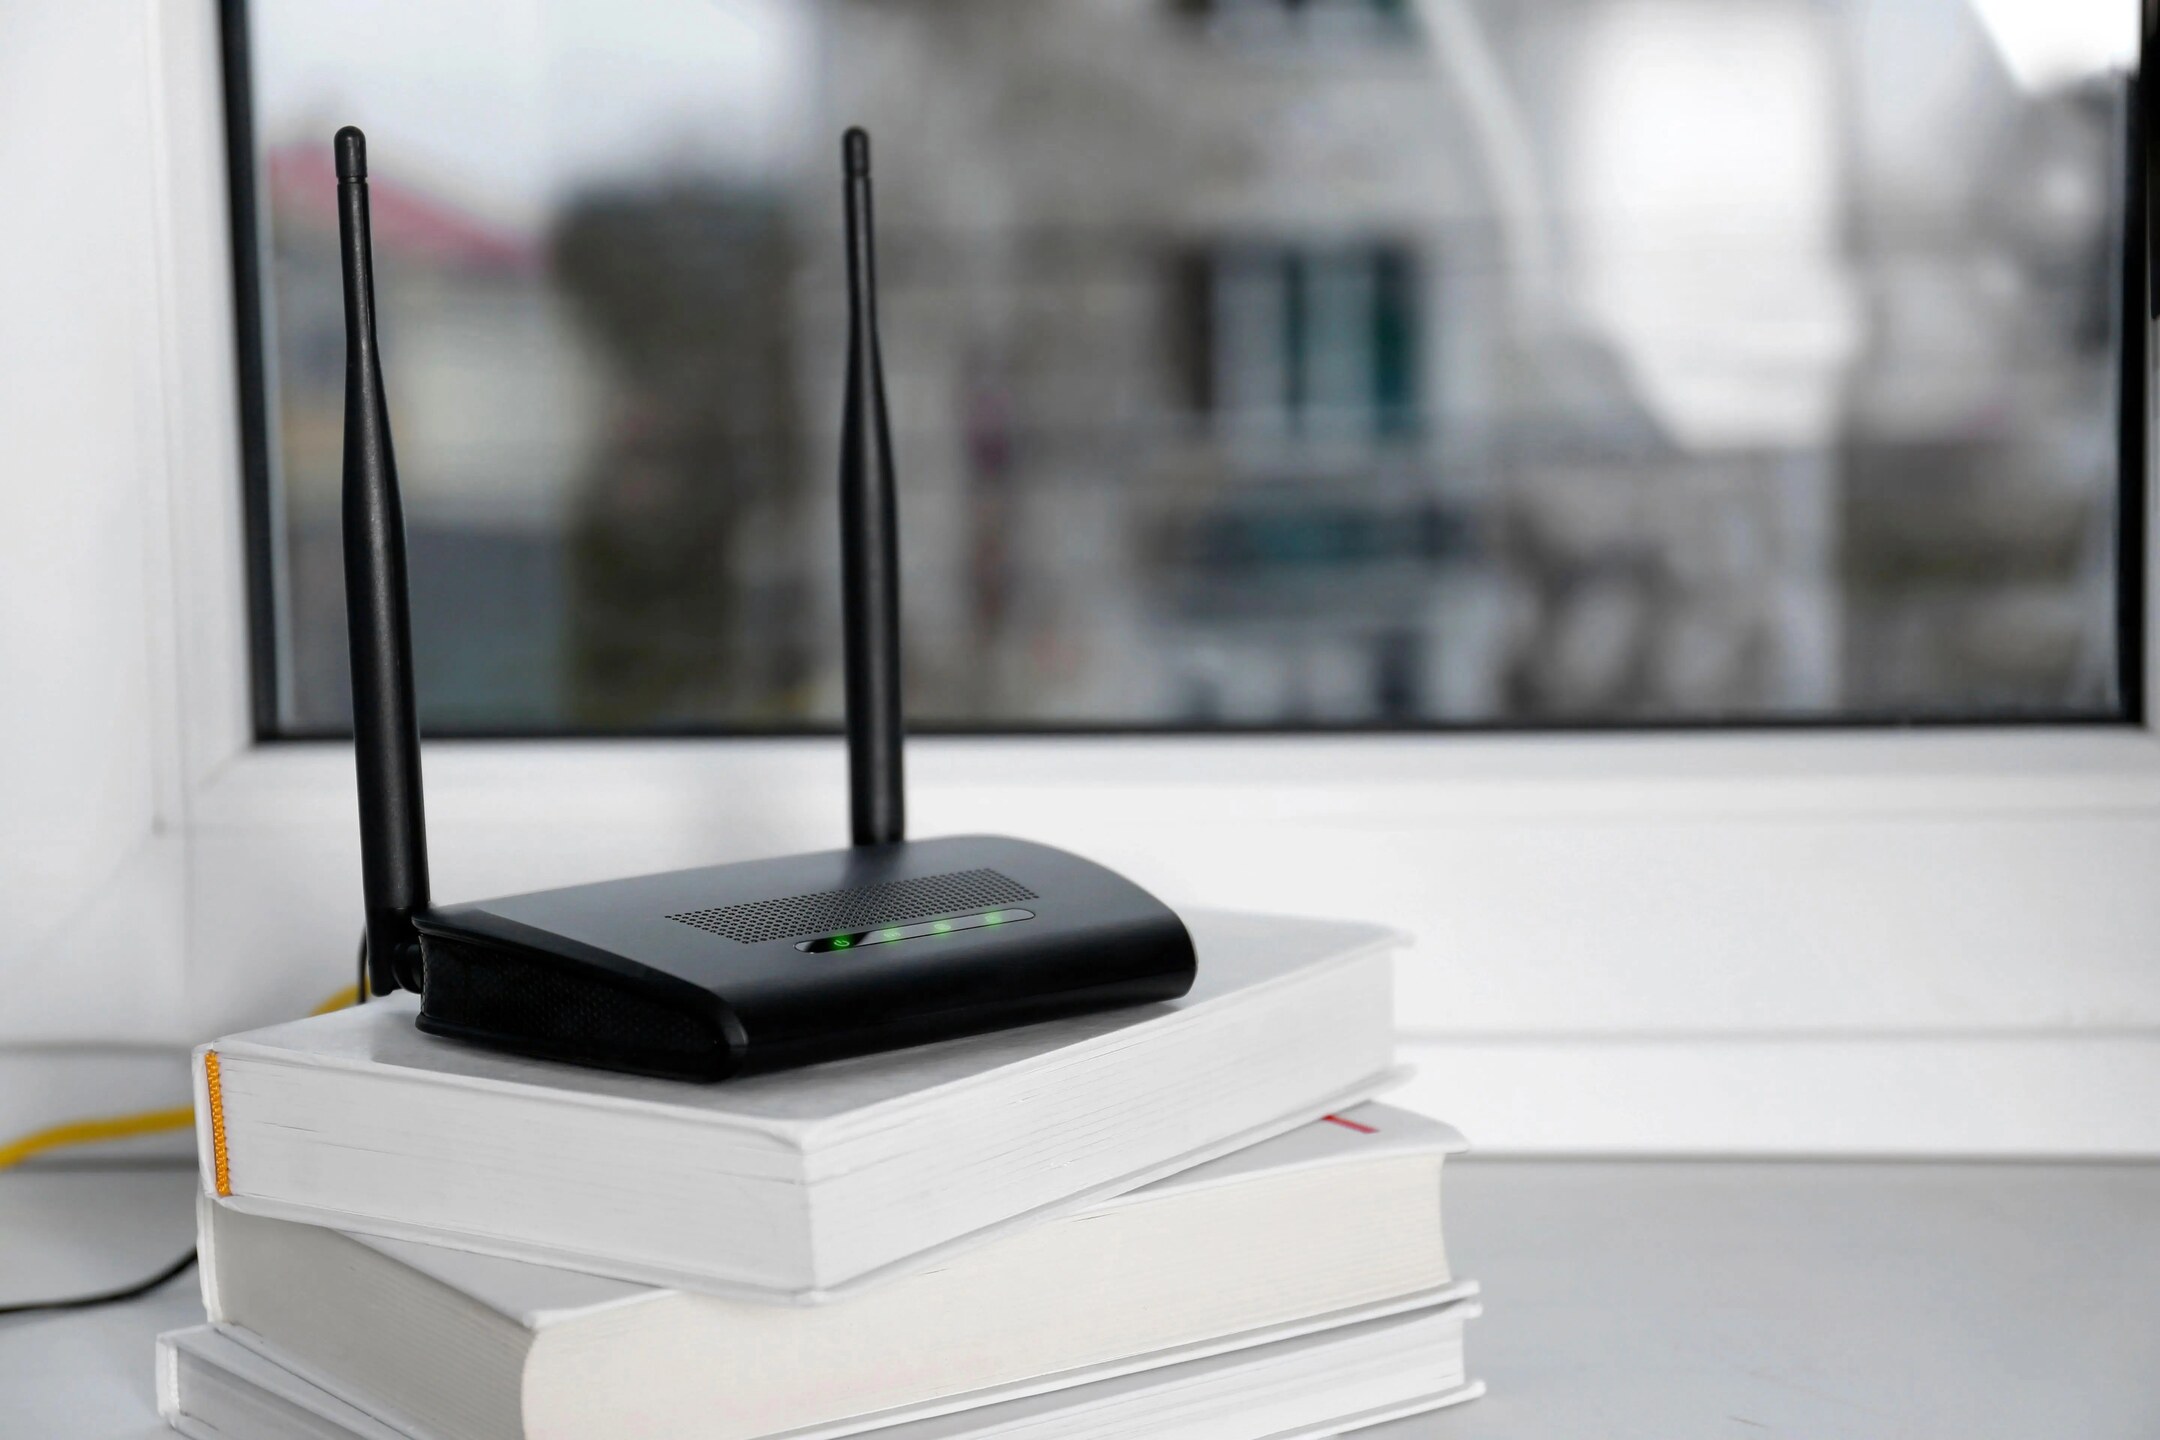 How To Move Your Wi-Fi Router